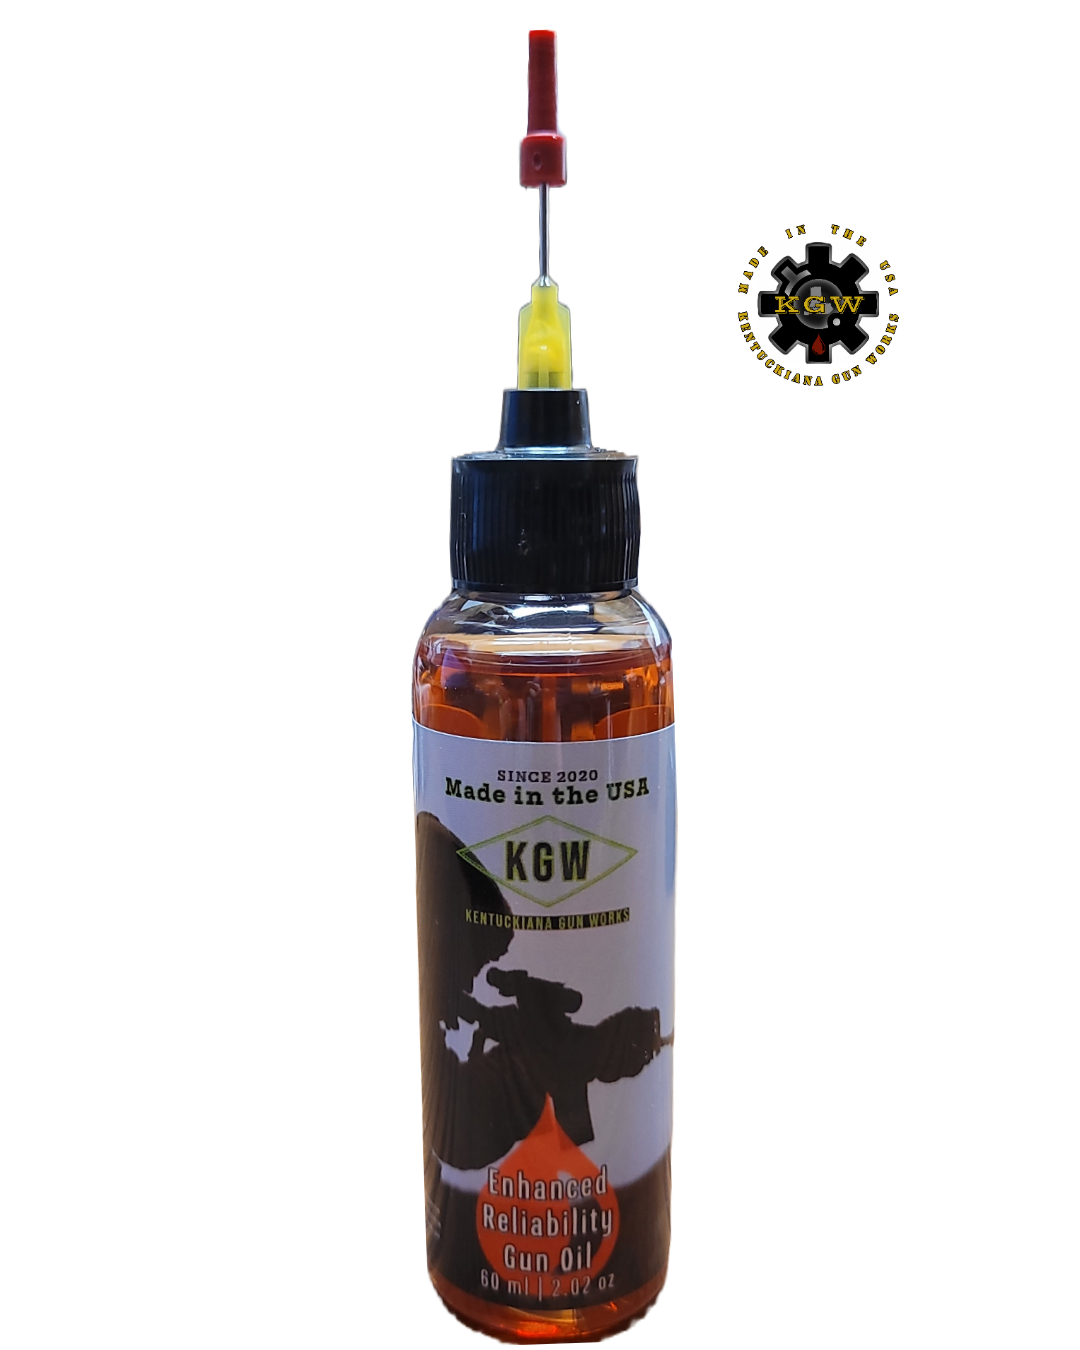 KGW Enhanced Reliability Oil with Needle Applicator